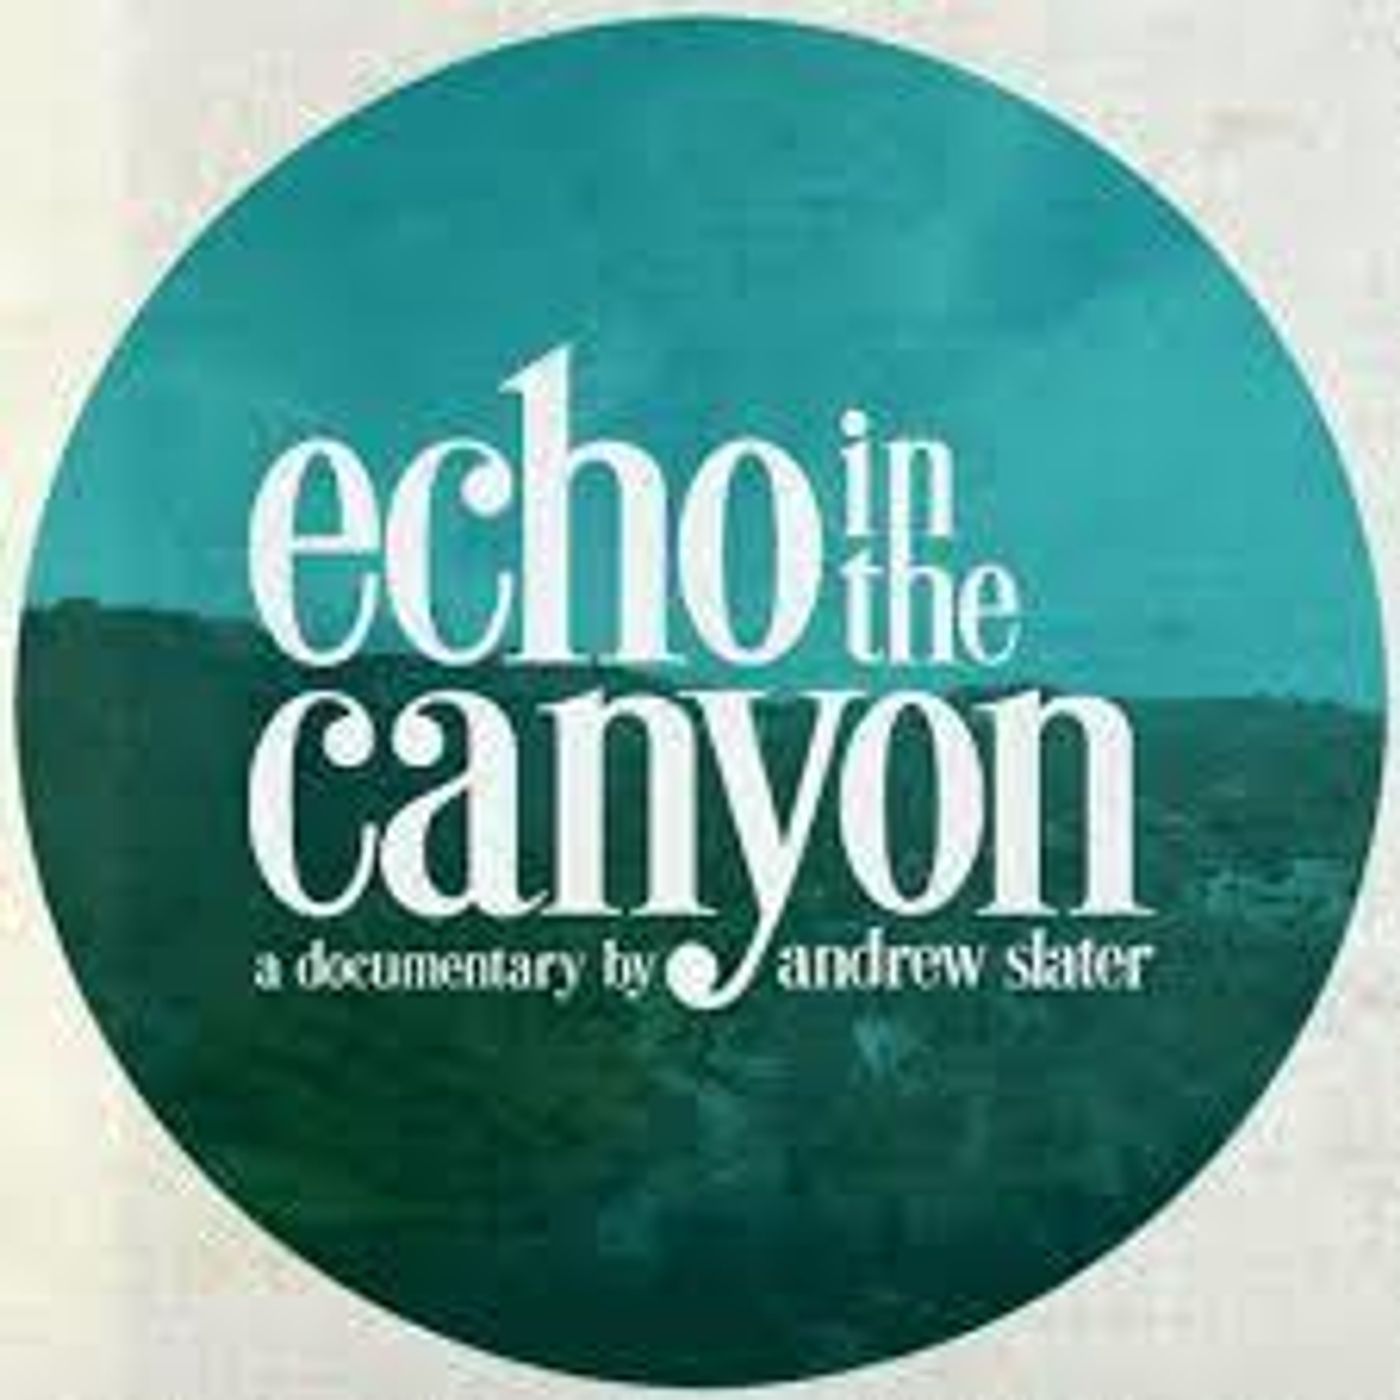 Episode 197: Jakob Dylan & Andrew Slater On Echo In The Canyon